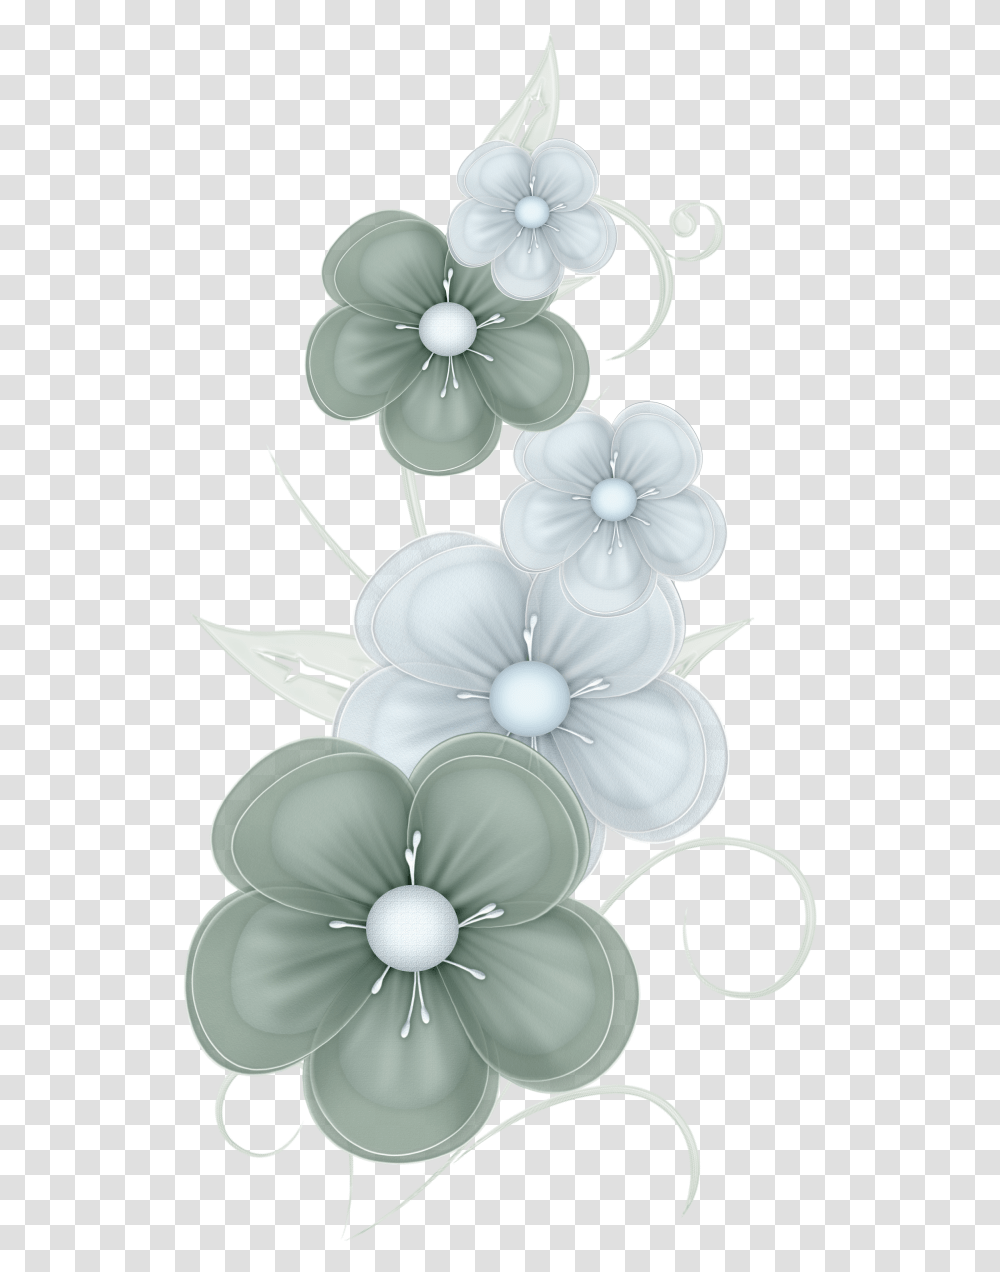 Flower Clipart Green Flowers Pngs, Jewelry, Accessories, Accessory, Graphics Transparent Png